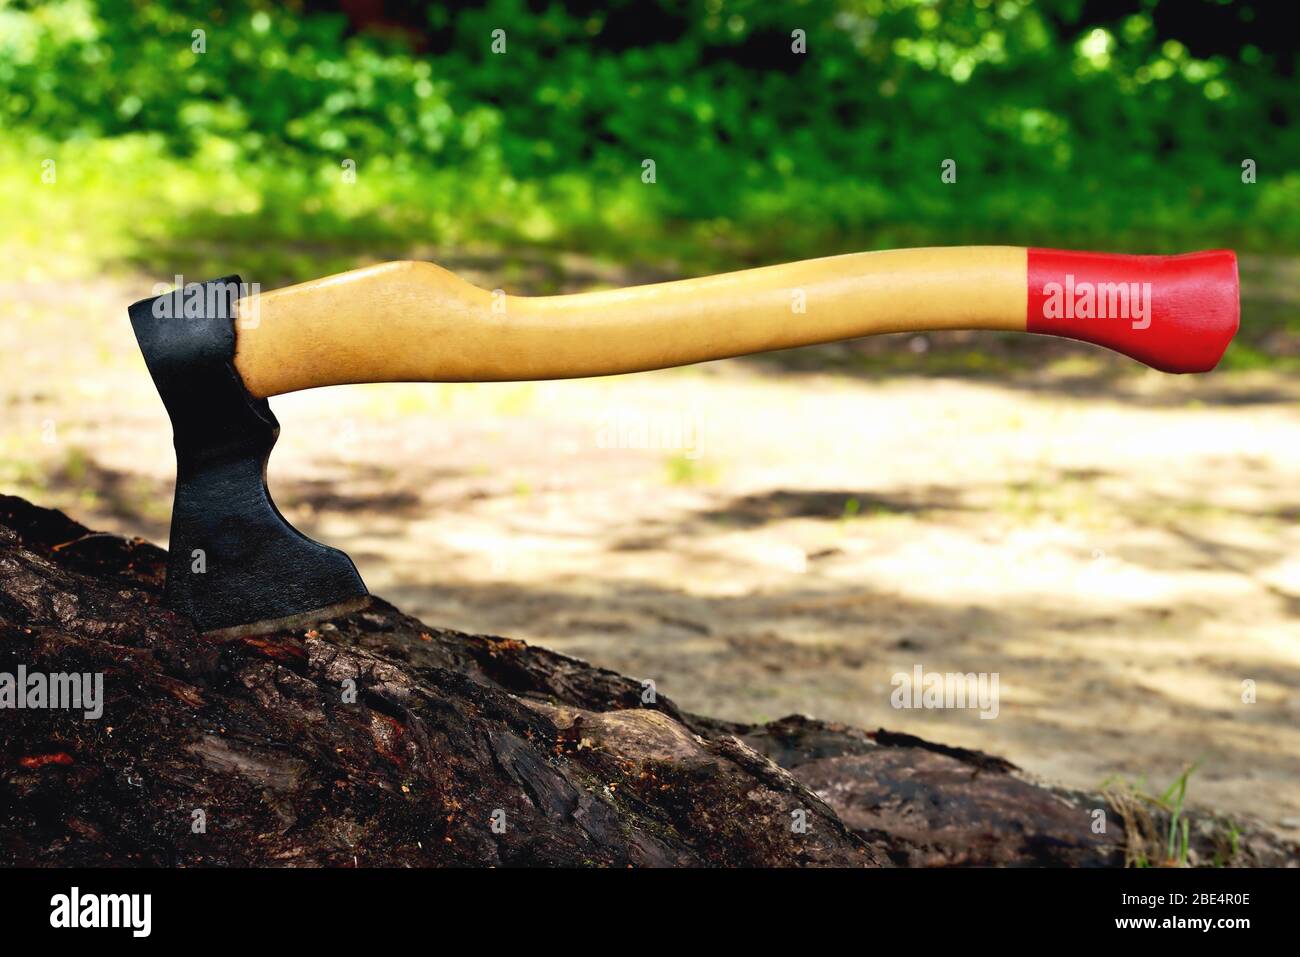 a beautiful-shaped ax sticks out in a tree, with a yellow handle close-up, on a natural background Stock Photo